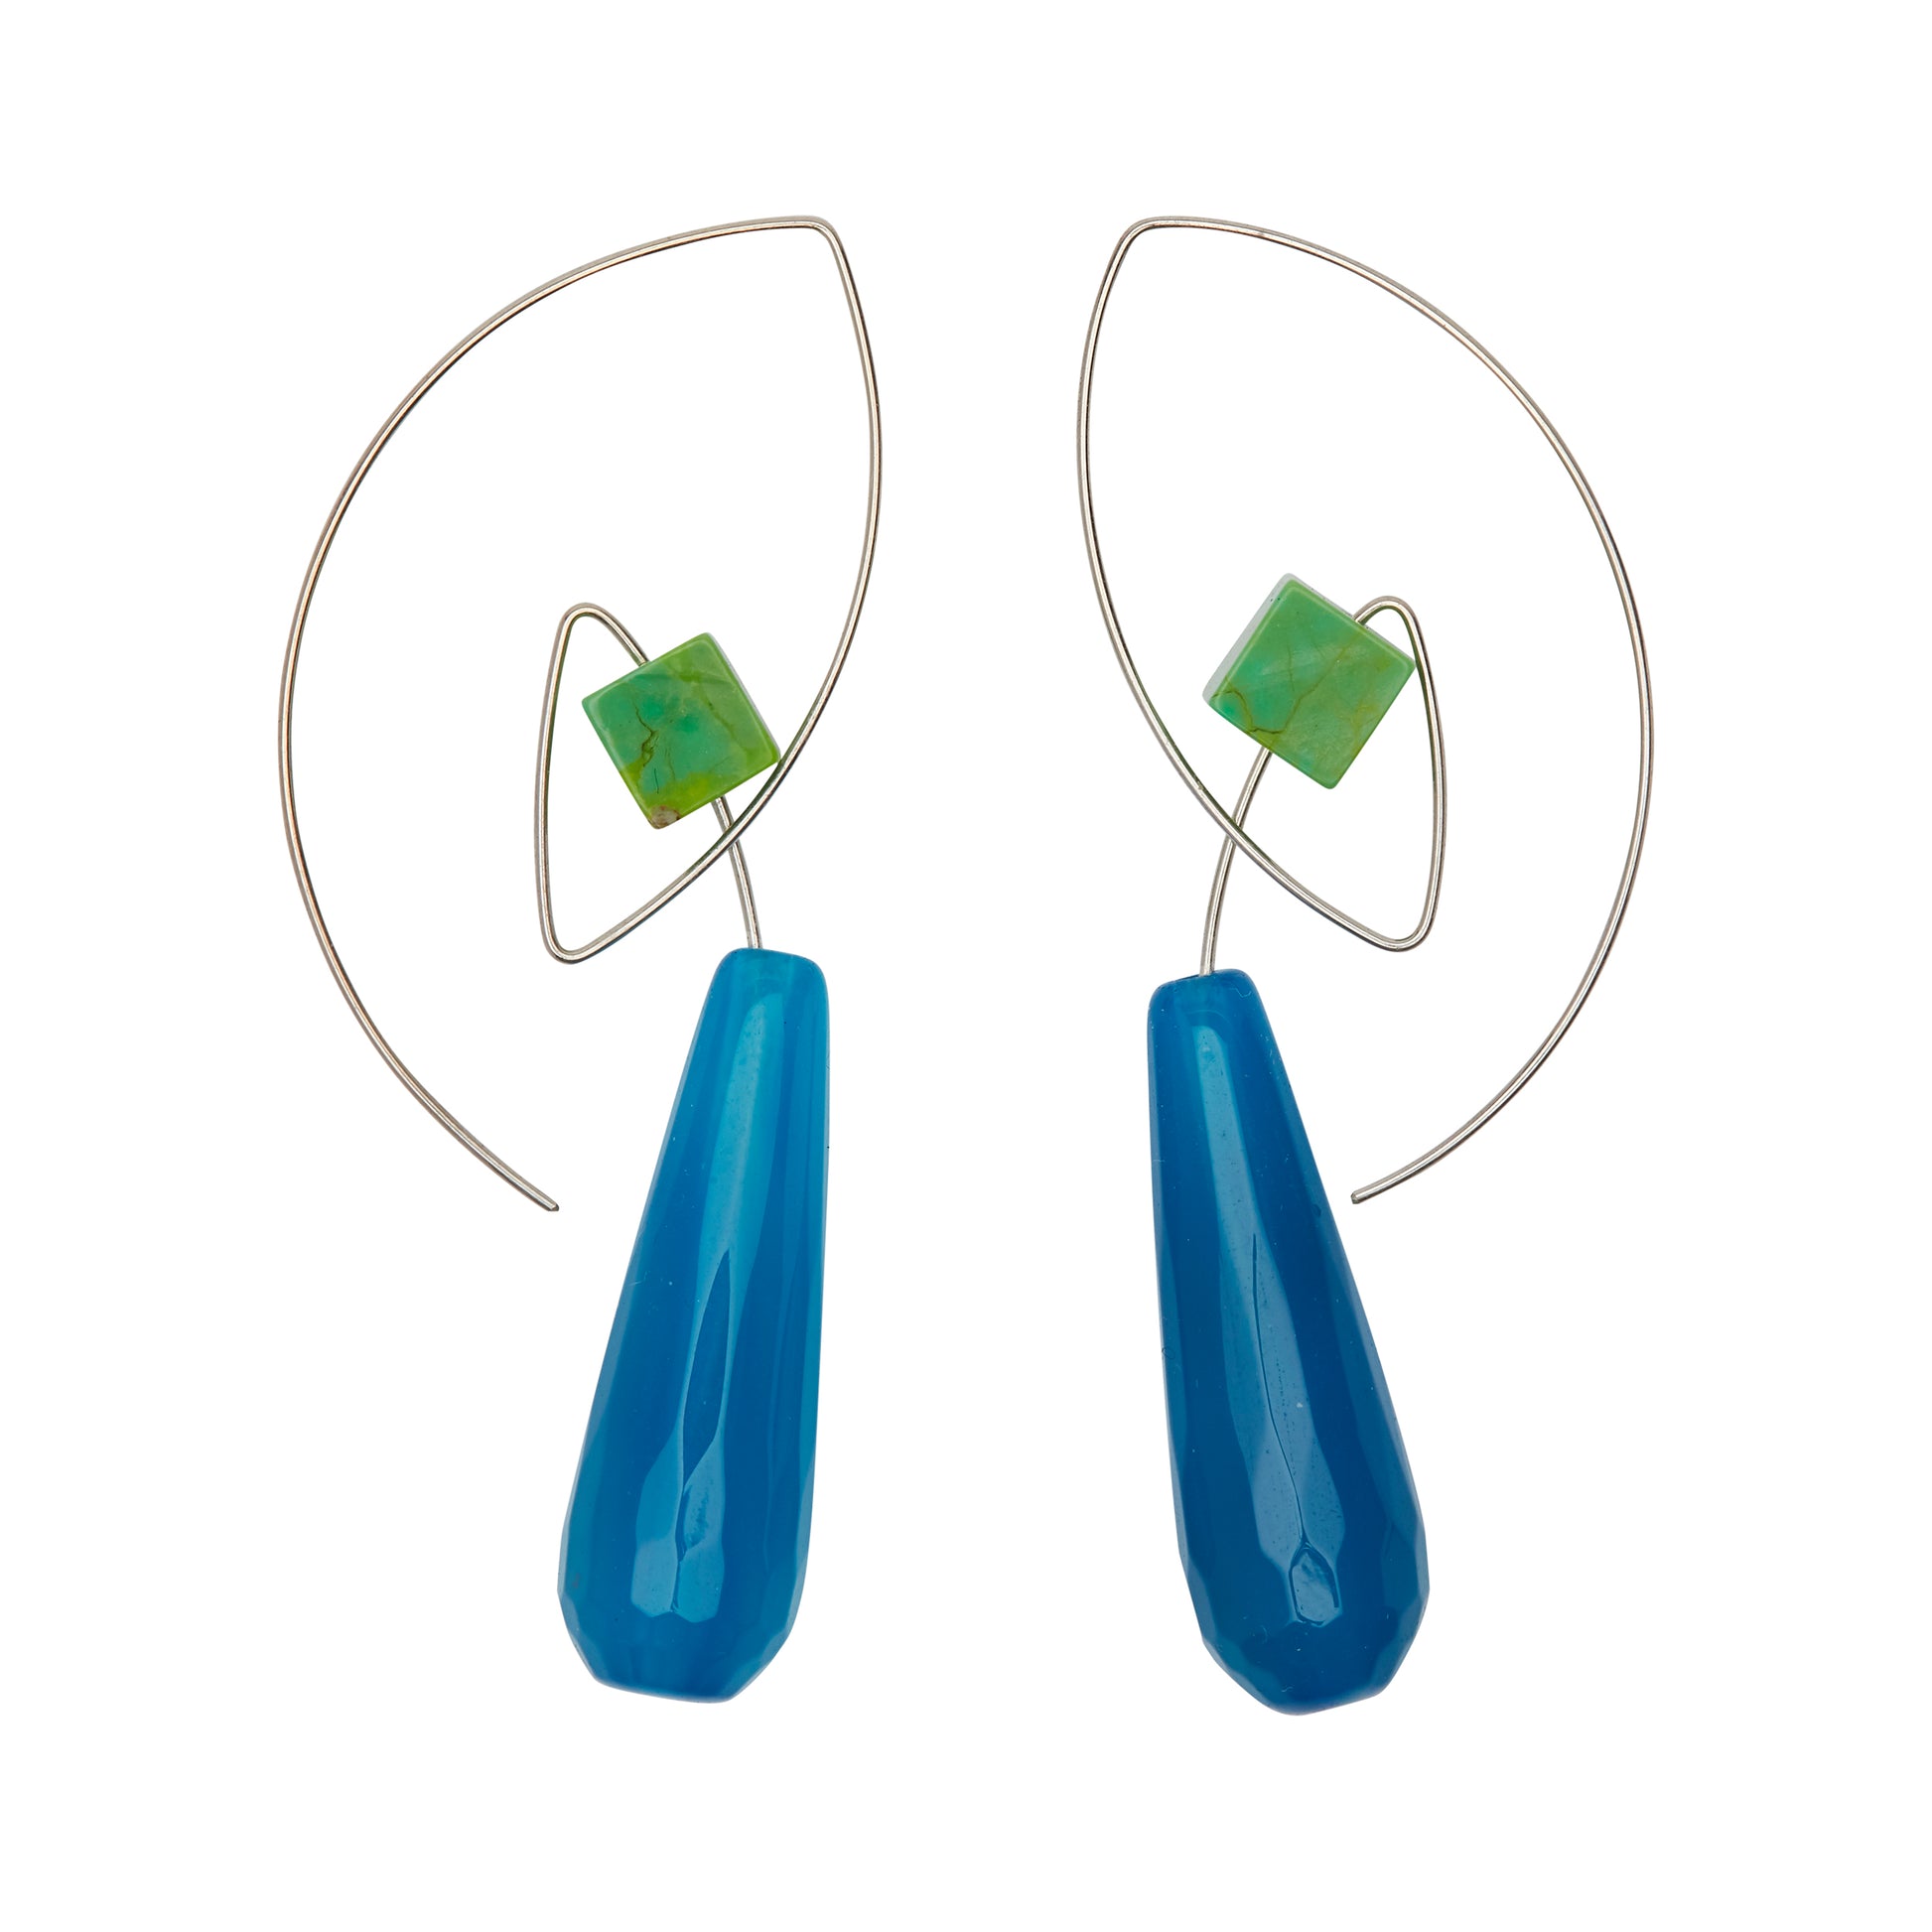 Angled Loop Earrings with Green Turquoise and Agate